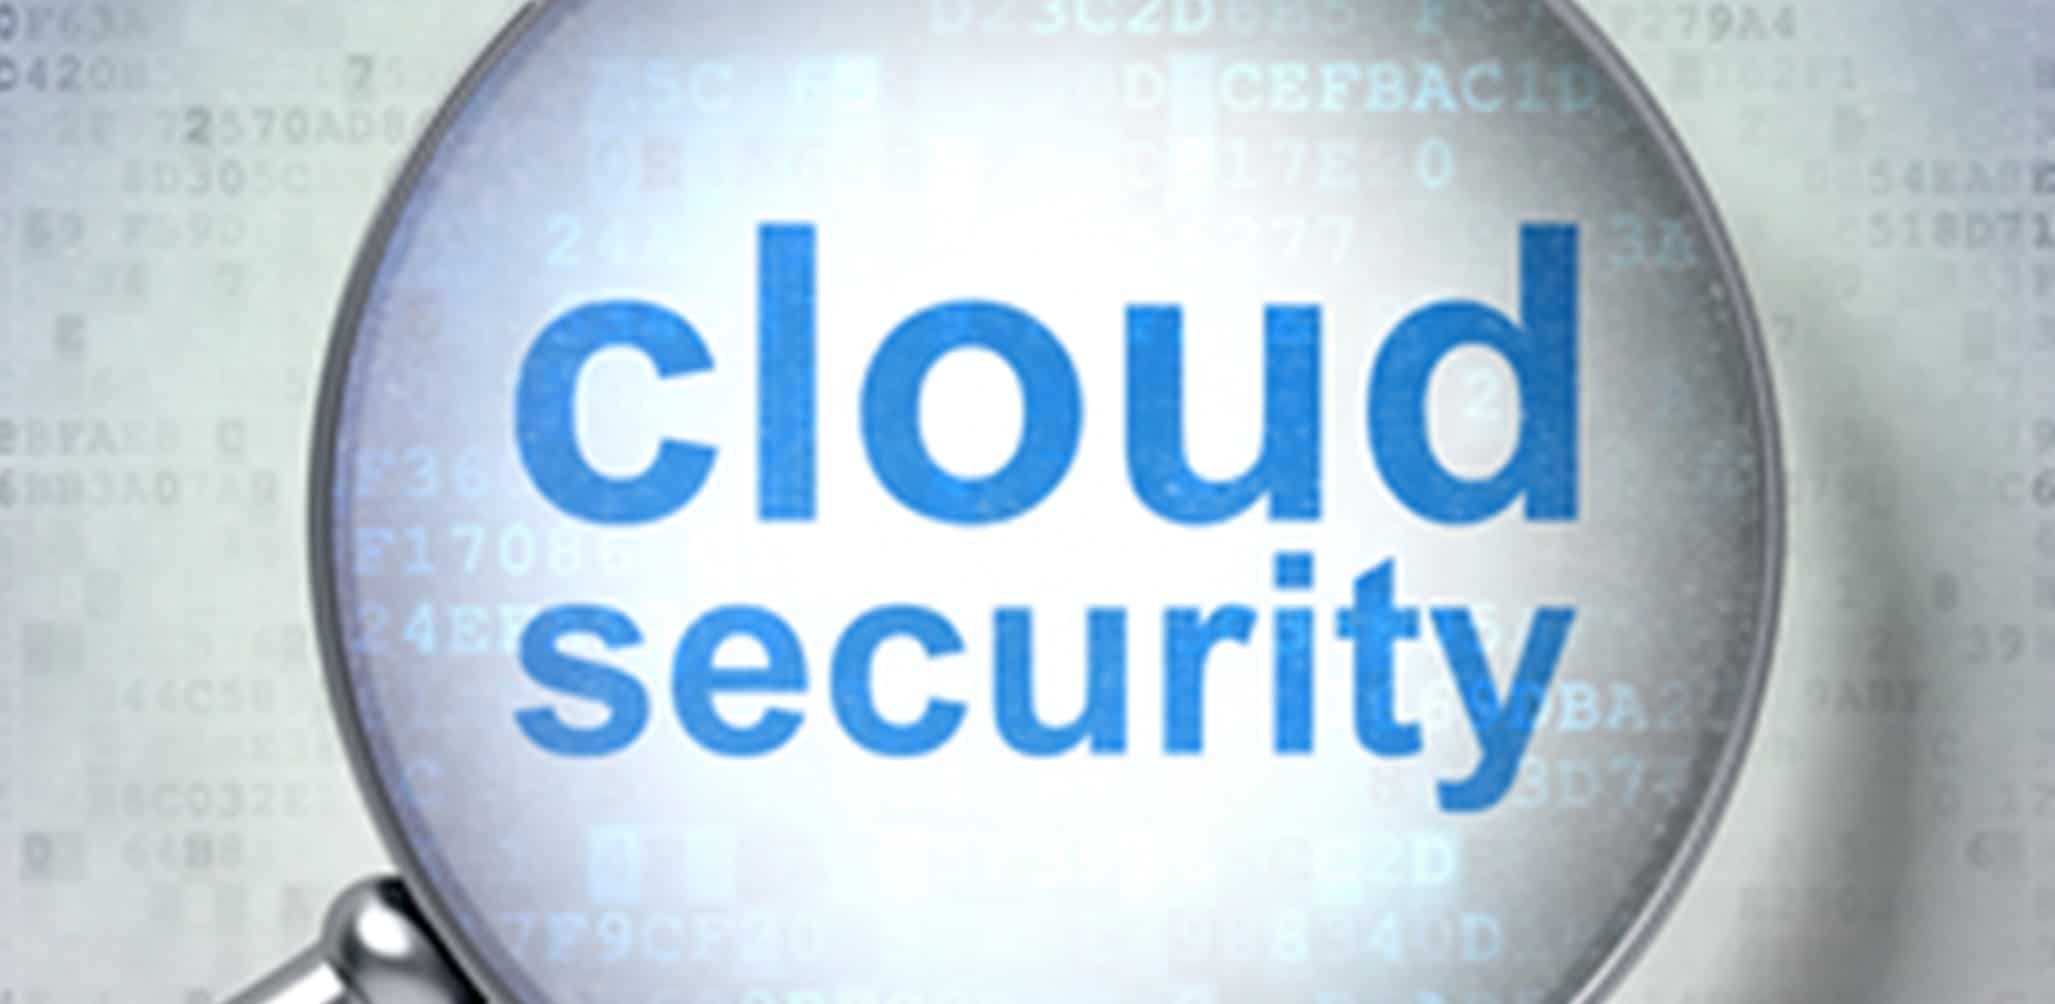 What Will be the Four Biggest Drivers of Cloud Security Innovation in 2016?